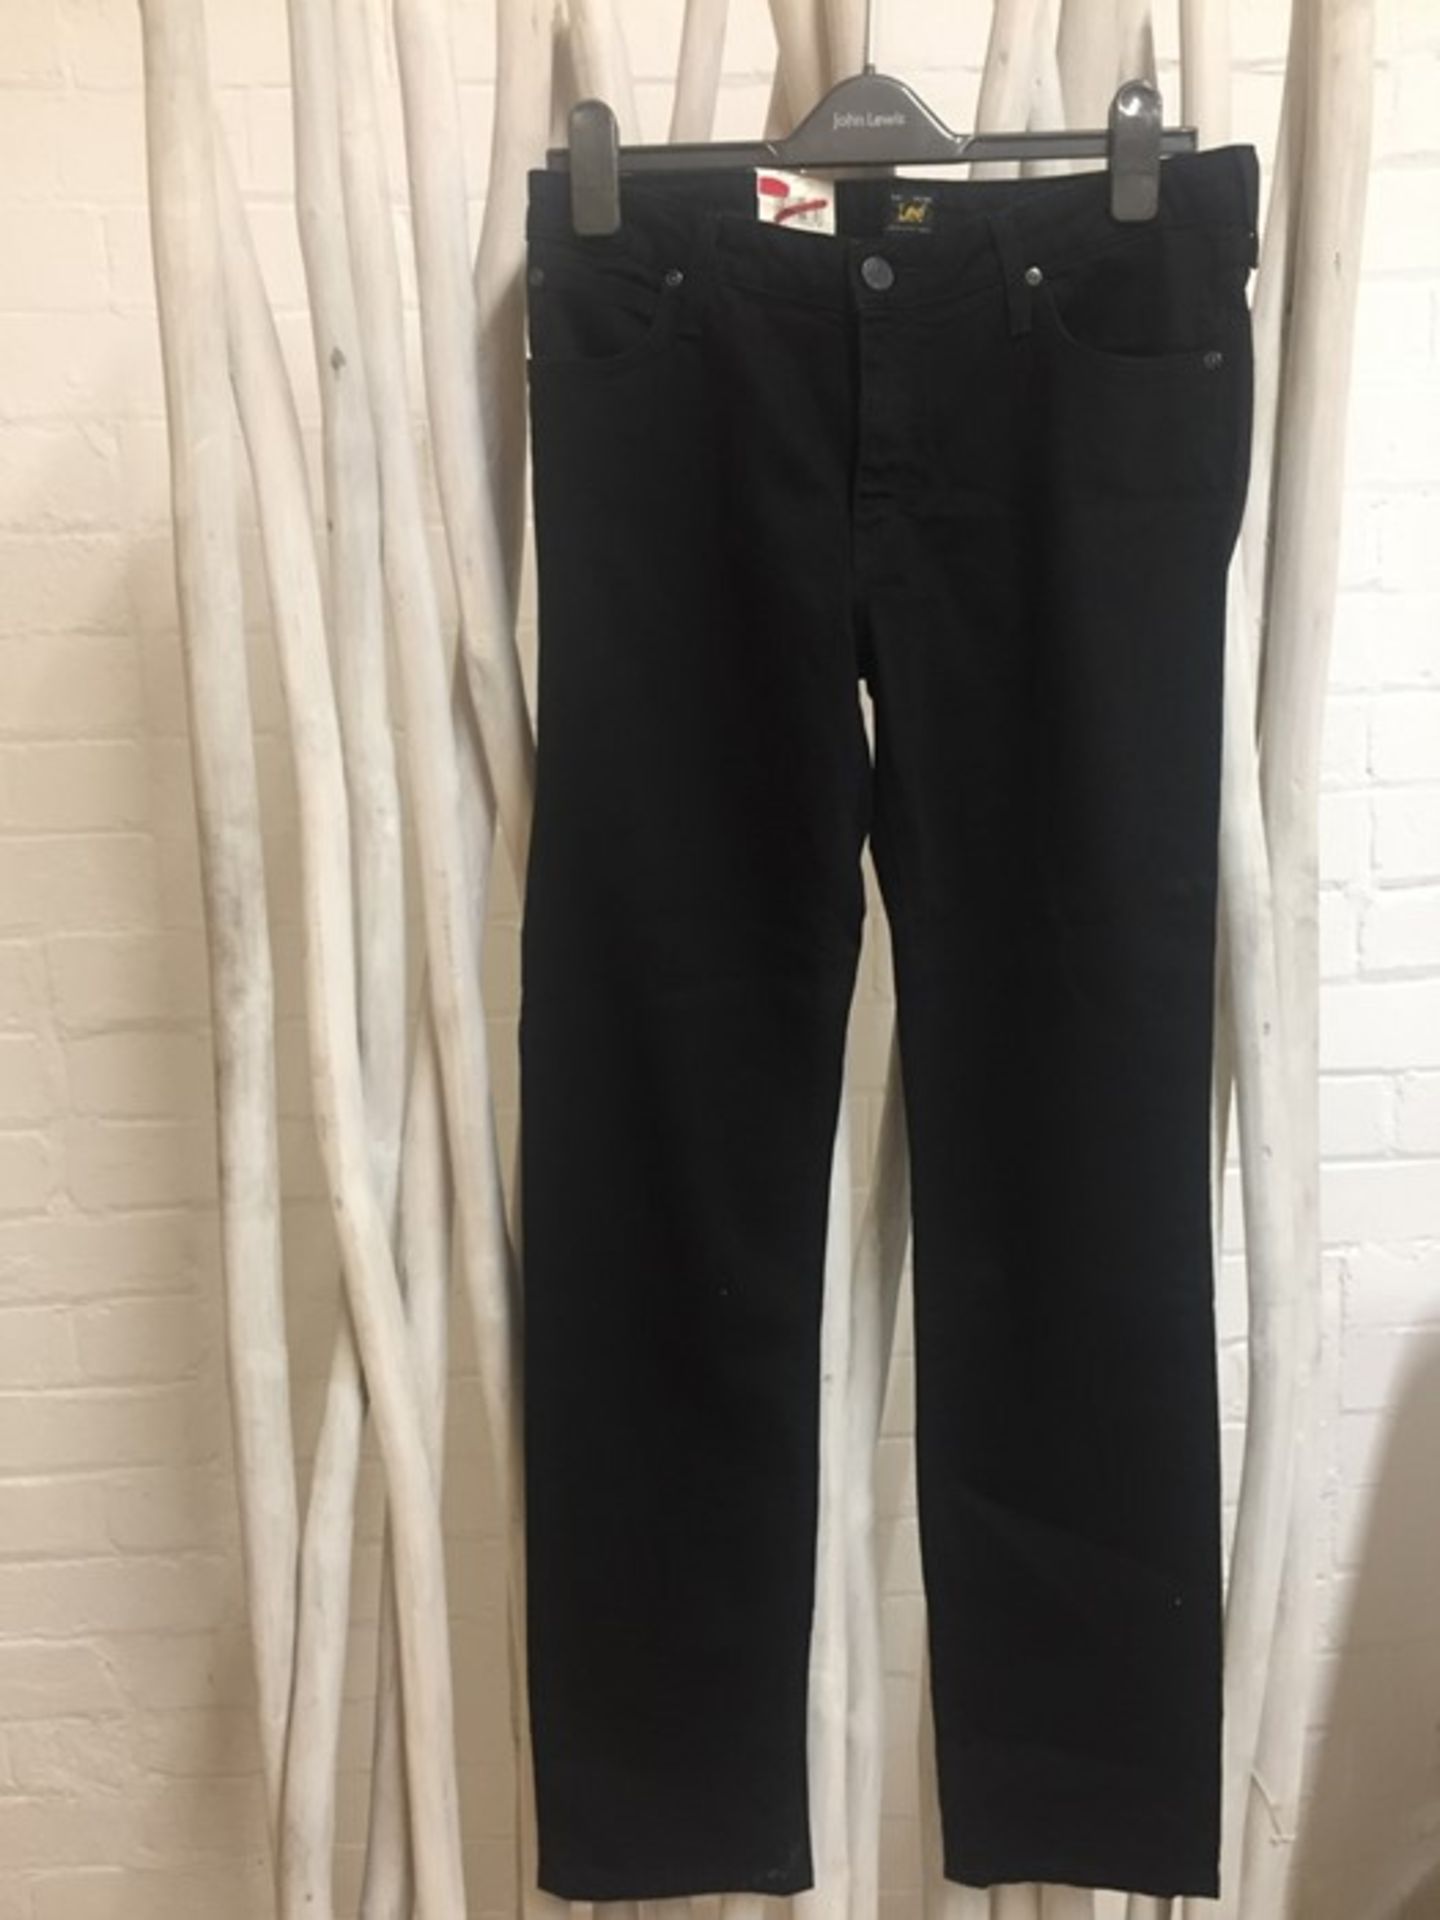 1 LEE MARION STRAIGHT BLACK JEANS IN W31 L33 / RRP £75.00 (PUBLIC VIEWING AVAILABLE)